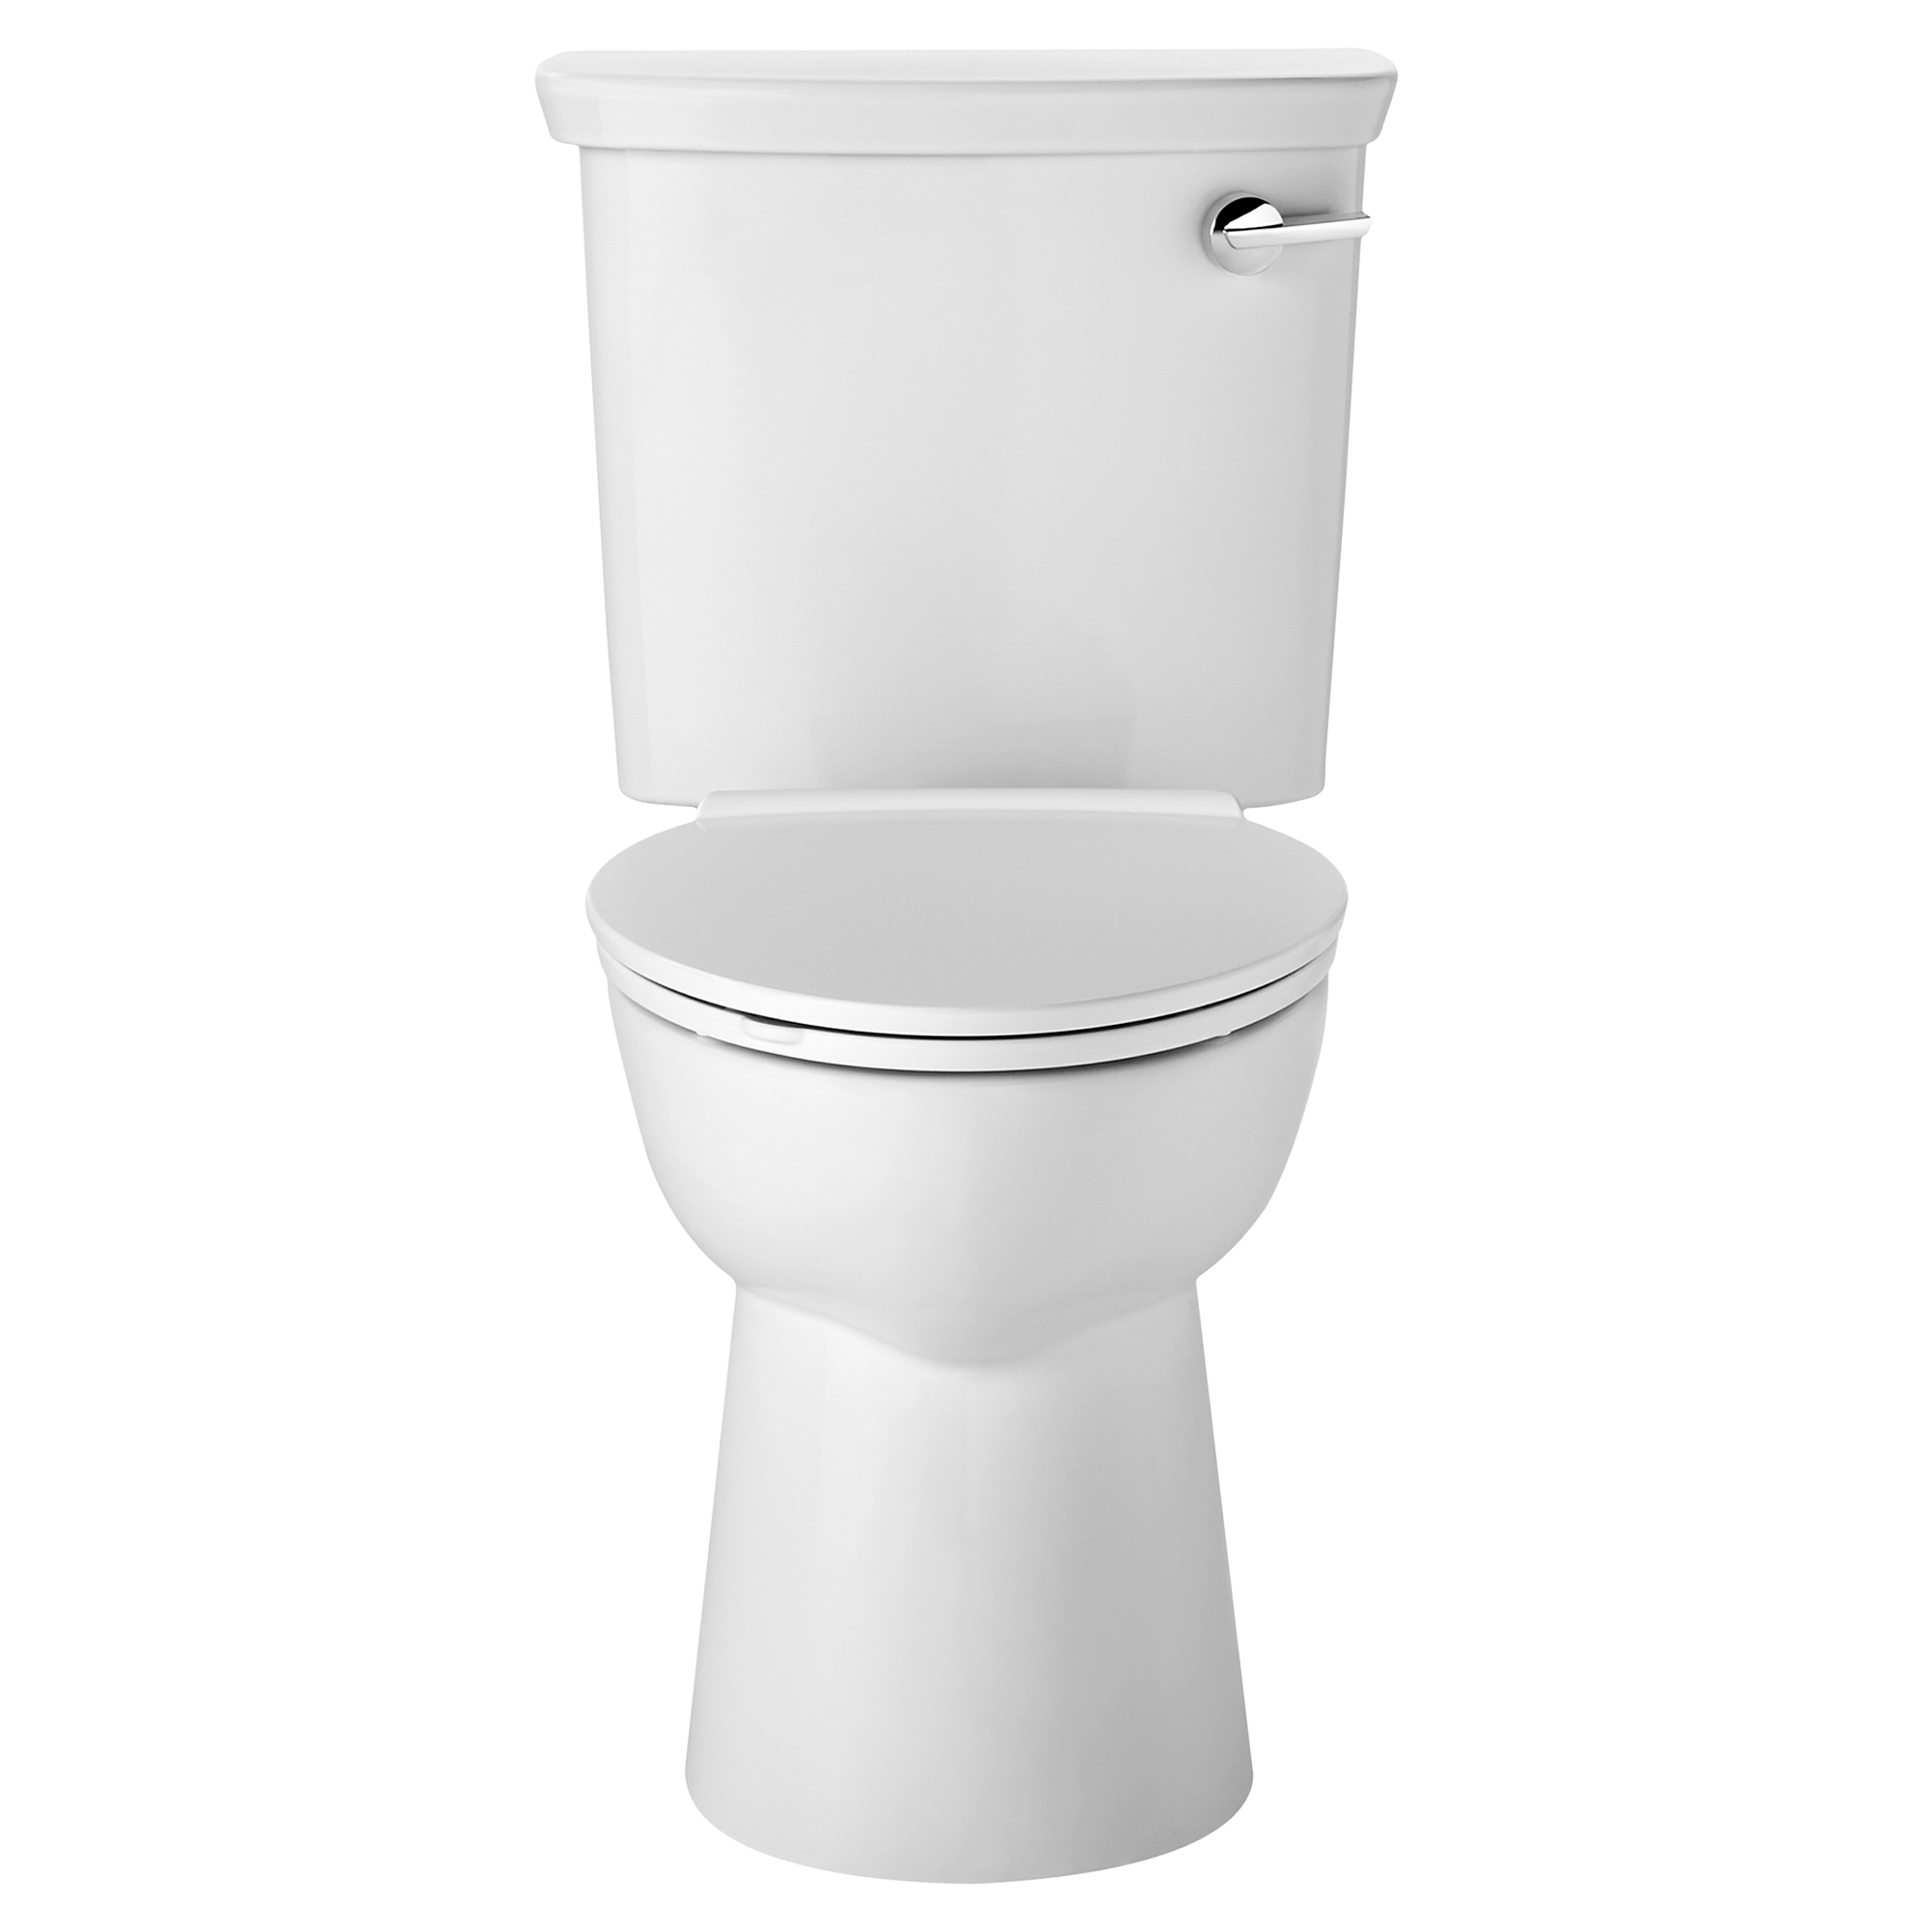 American Toilet Download Free PNG